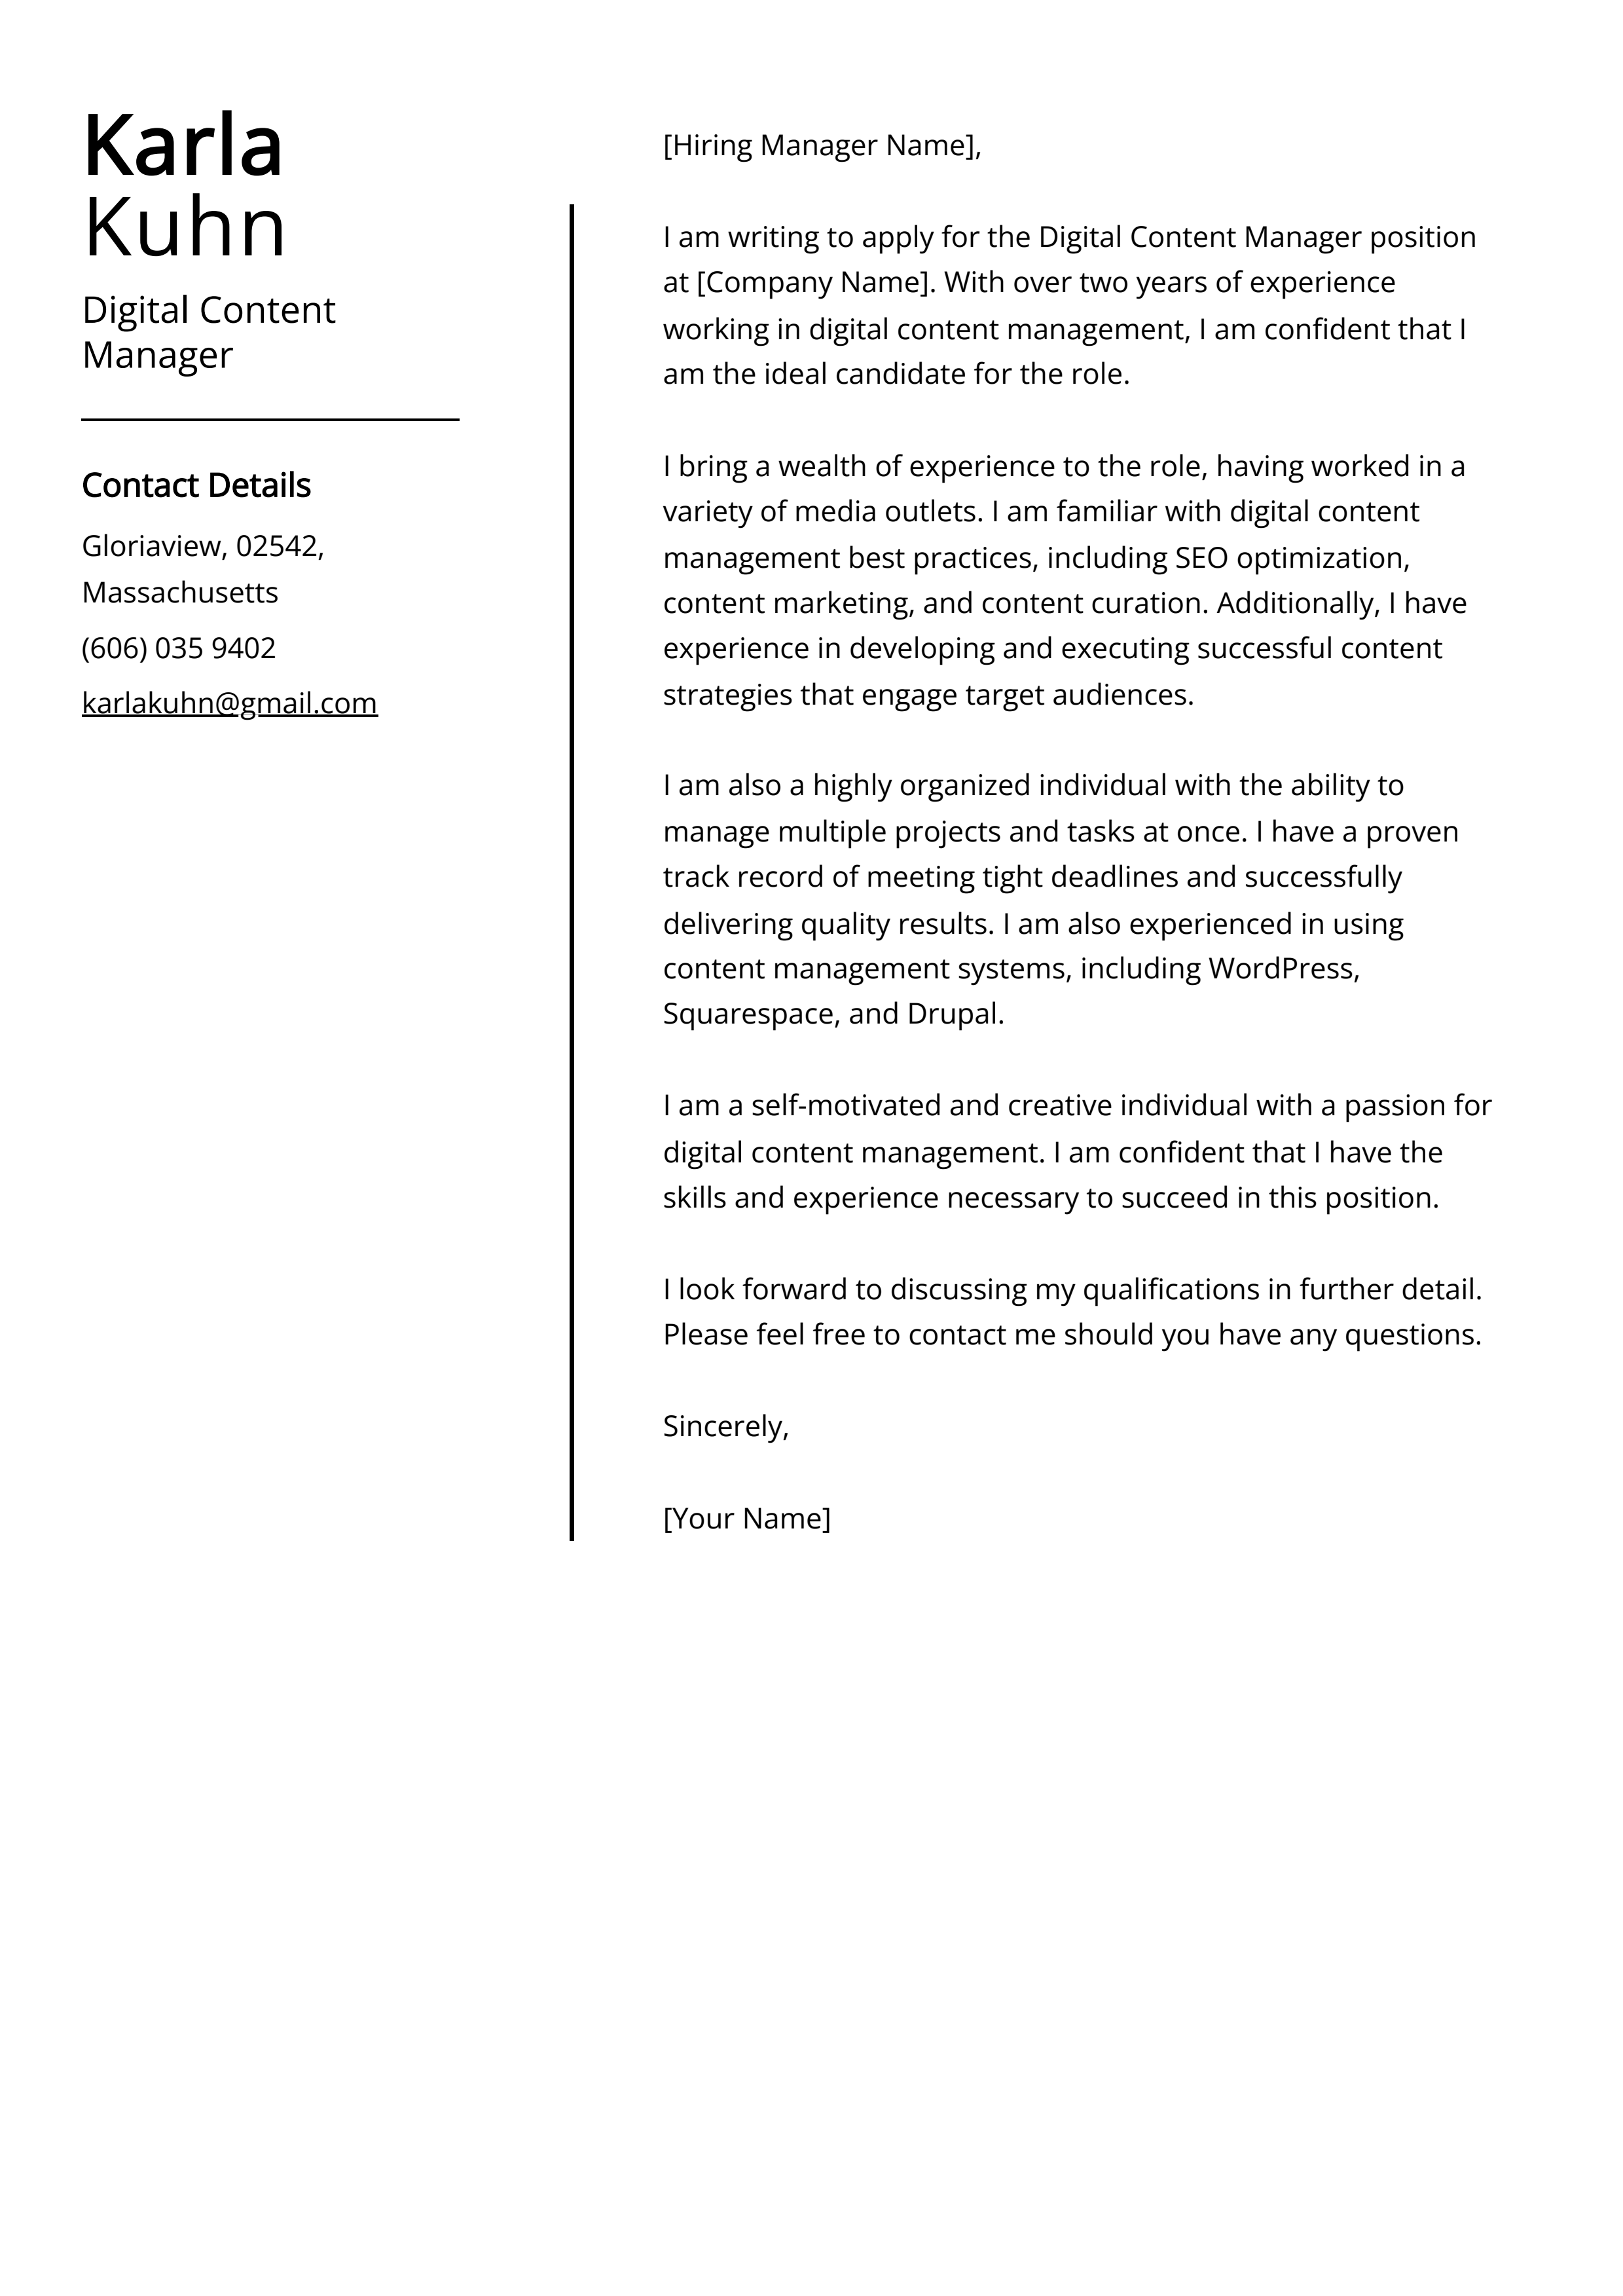 Digital Content Manager Cover Letter Example